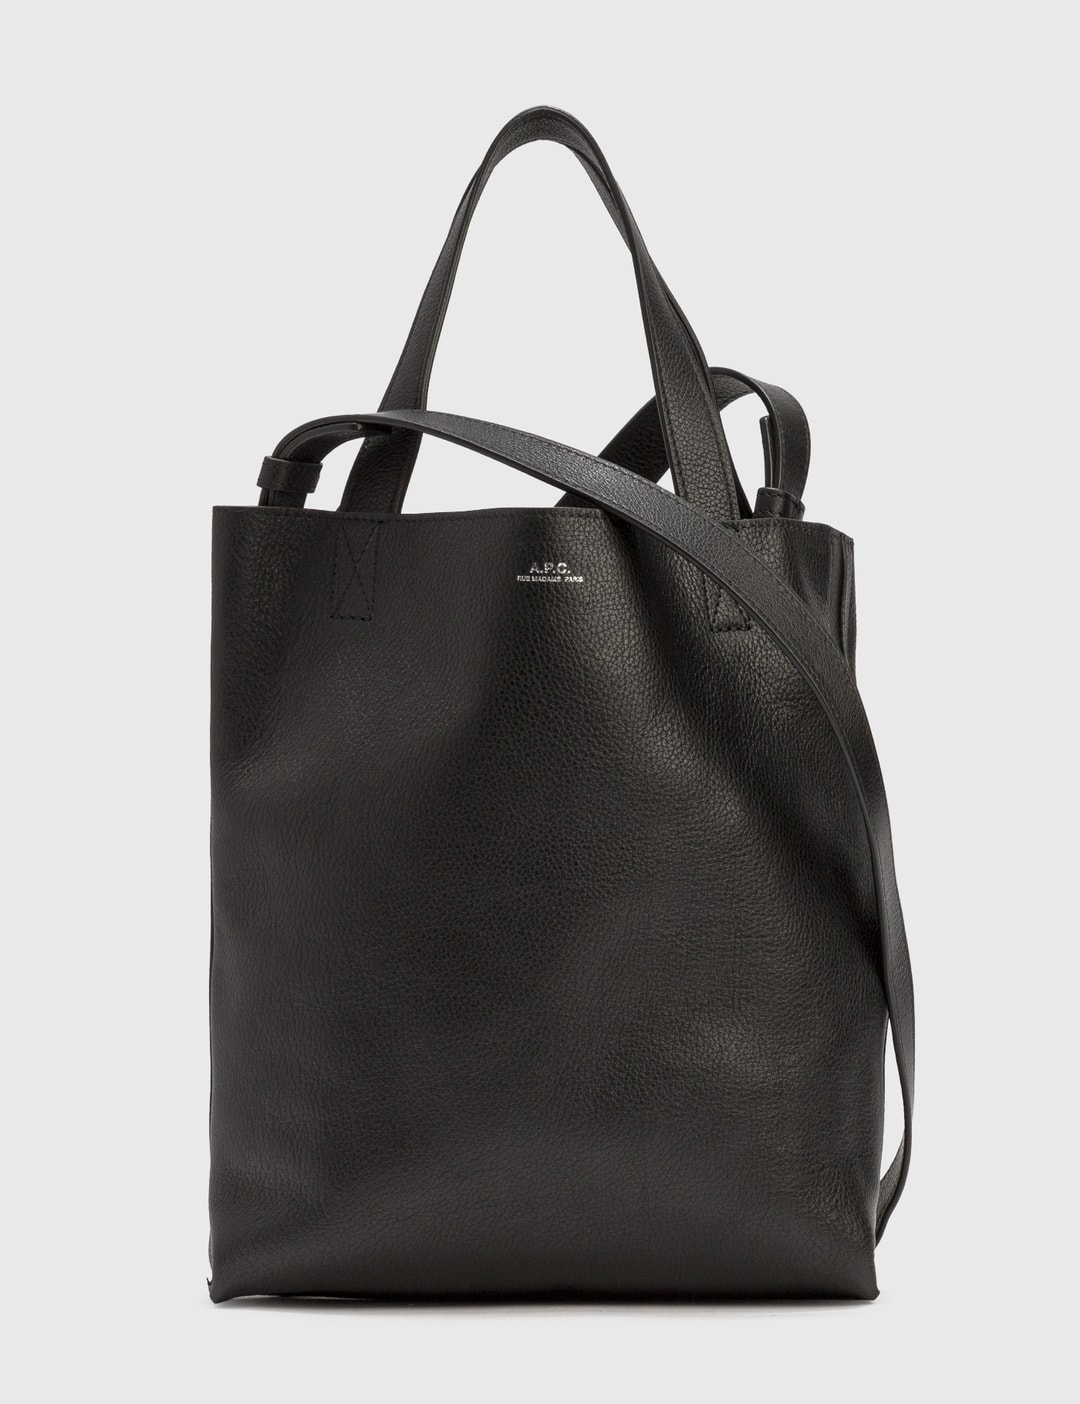 A.P.C. - Maiko Small Shopping Tote | HBX - Globally Curated Fashion and ...